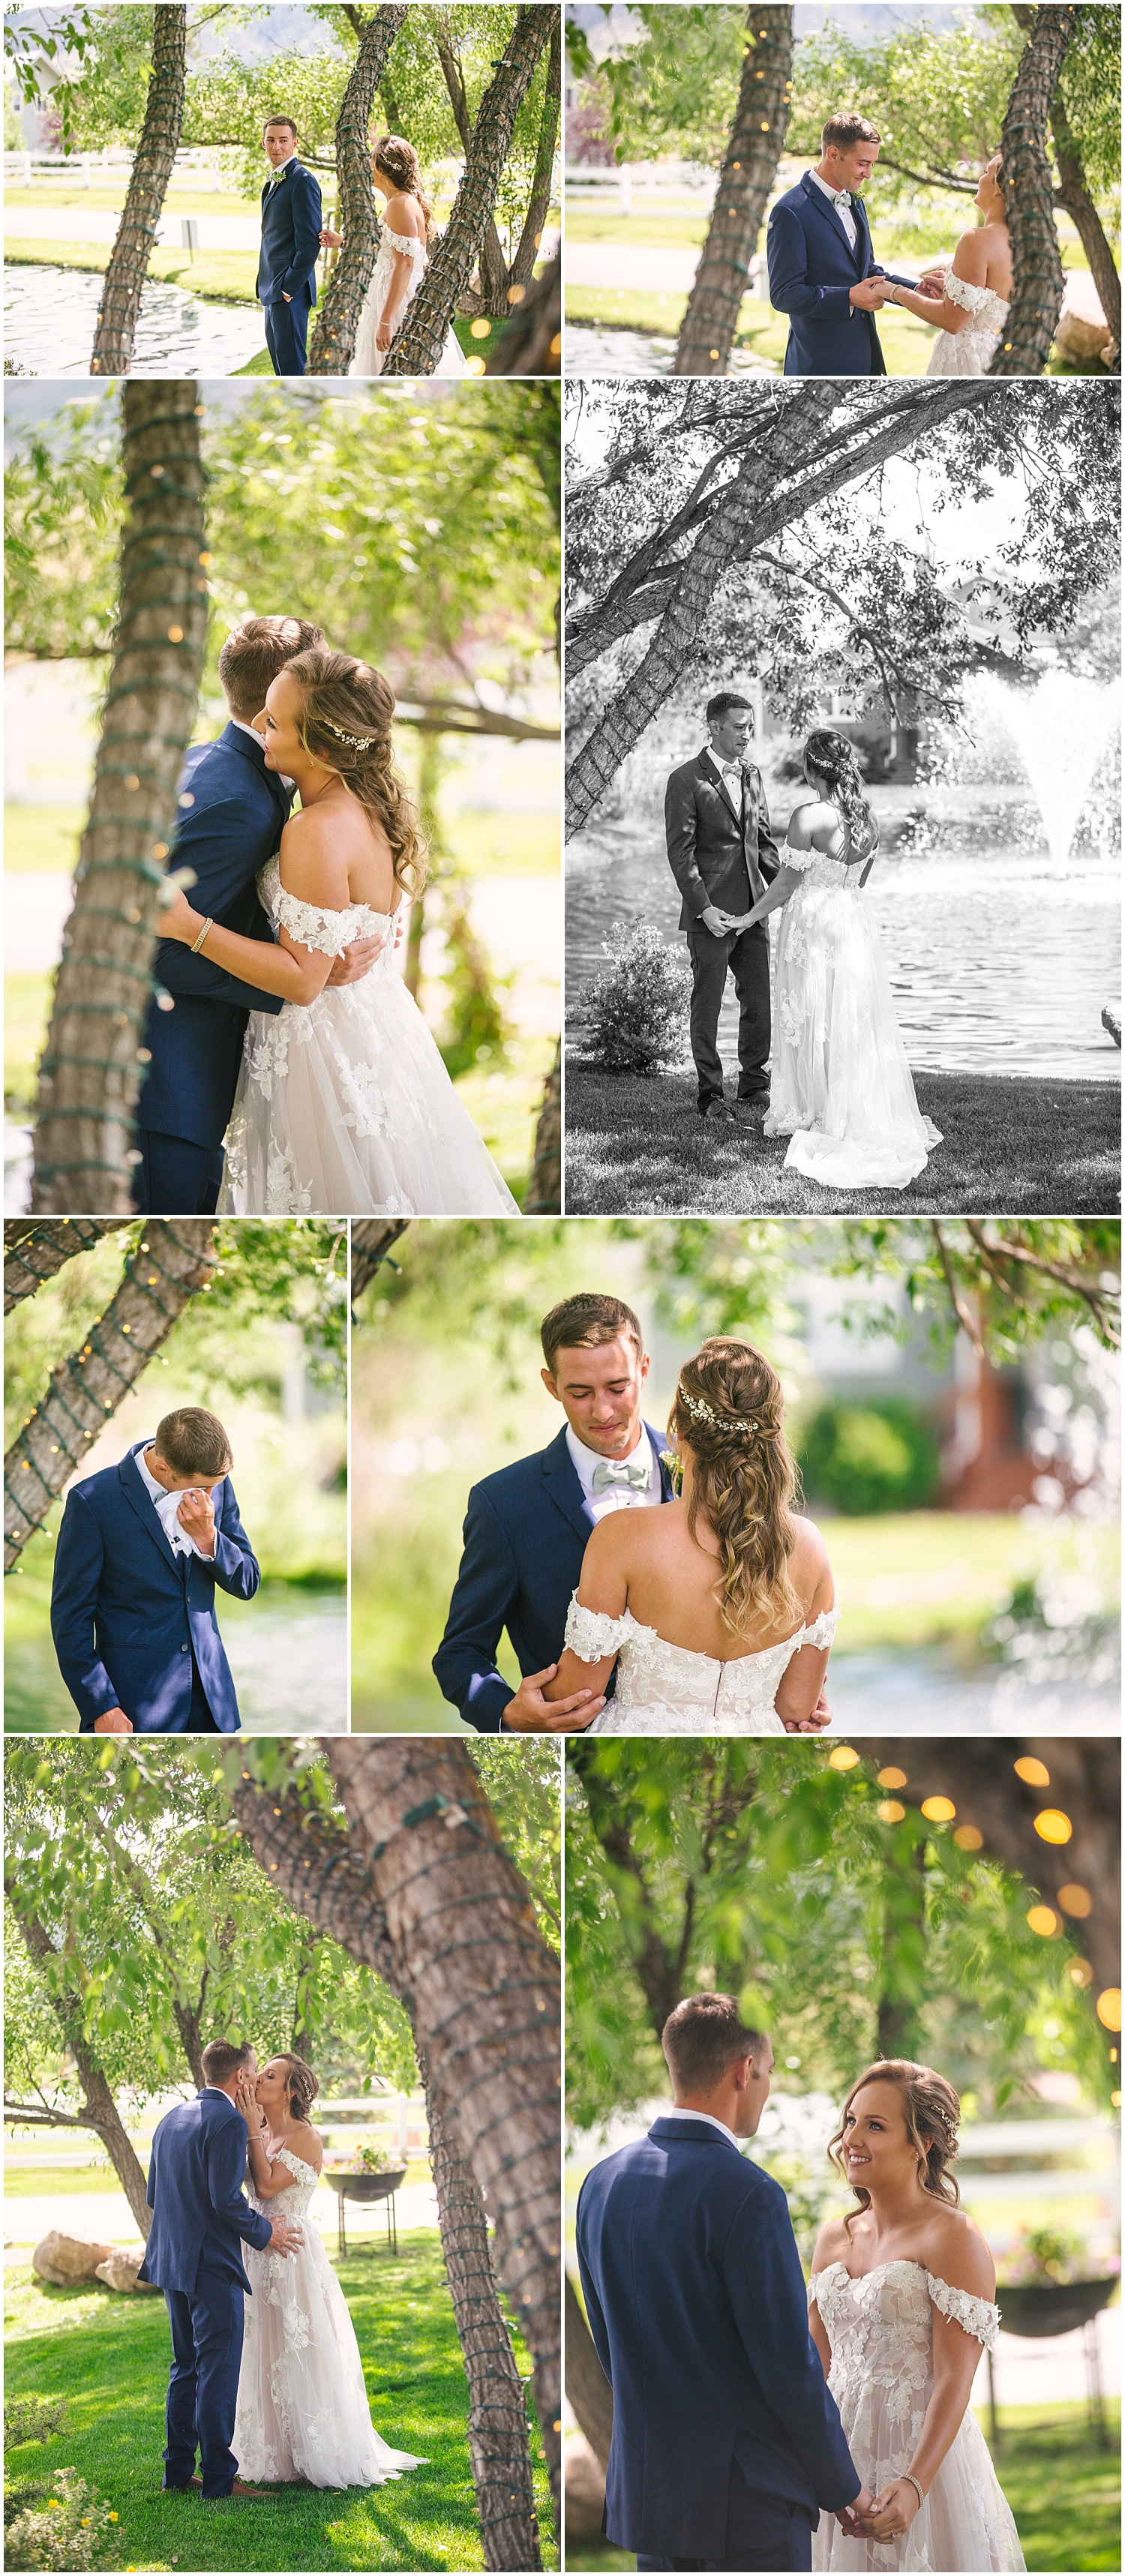 Bride and groom's first look by the fountain and twinkle lights at Crooked Willow Farms wedding